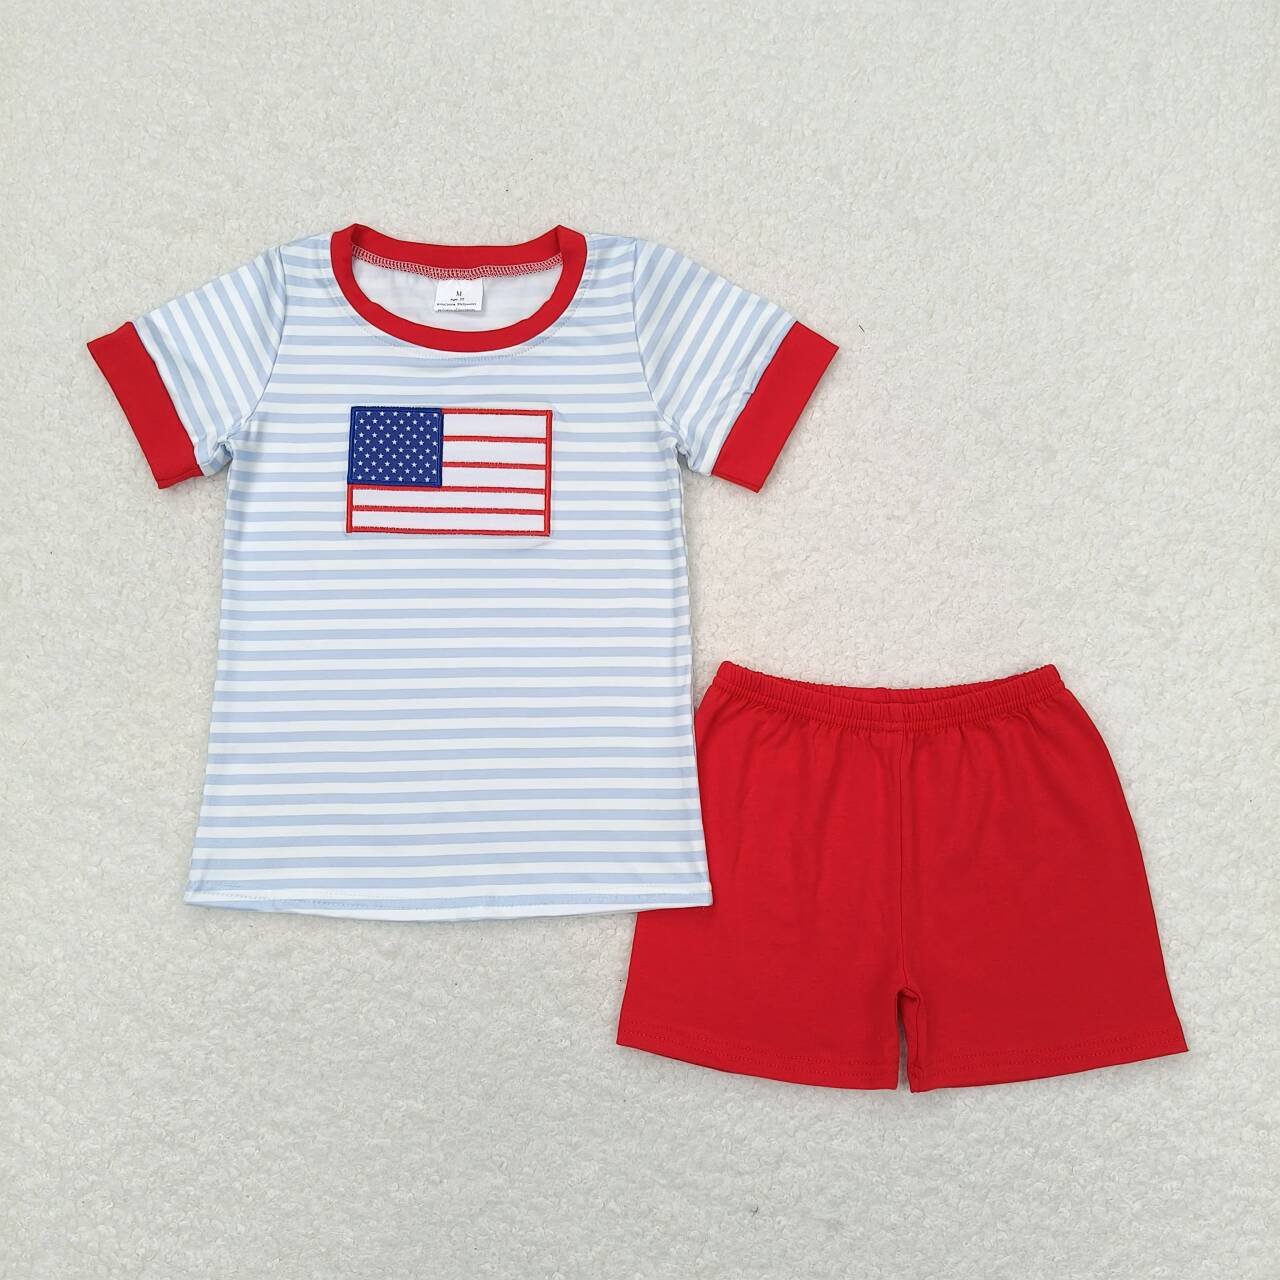 BSSO0684  Flag Embroidery Top Red Shorts Boys 4th of July Clothes Set